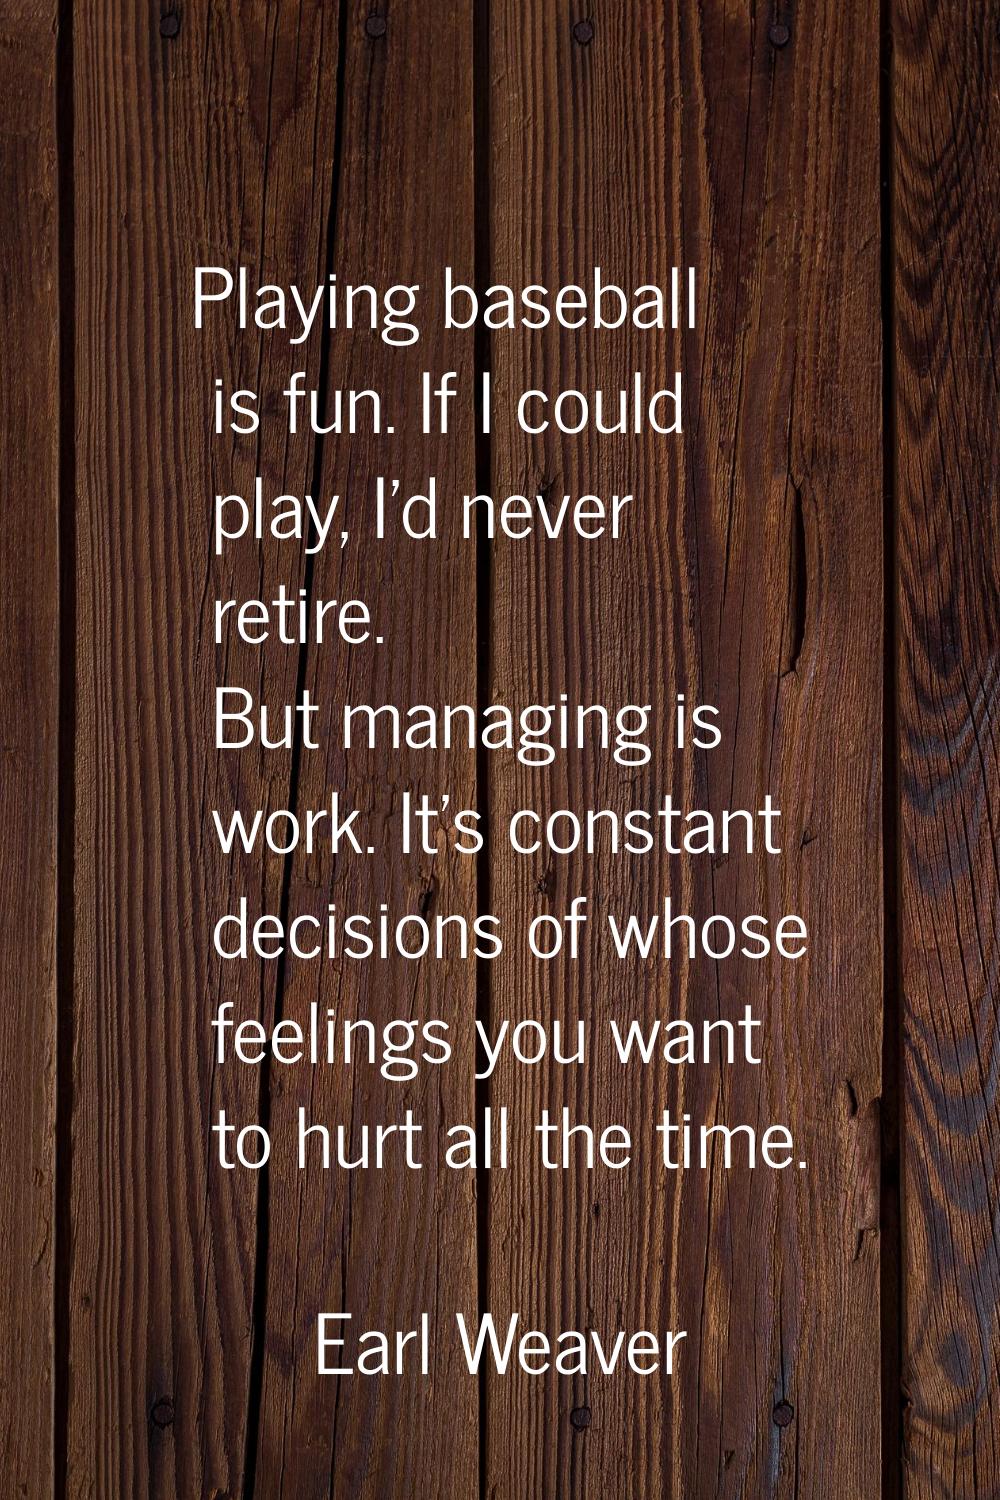 Playing baseball is fun. If I could play, I'd never retire. But managing is work. It's constant dec